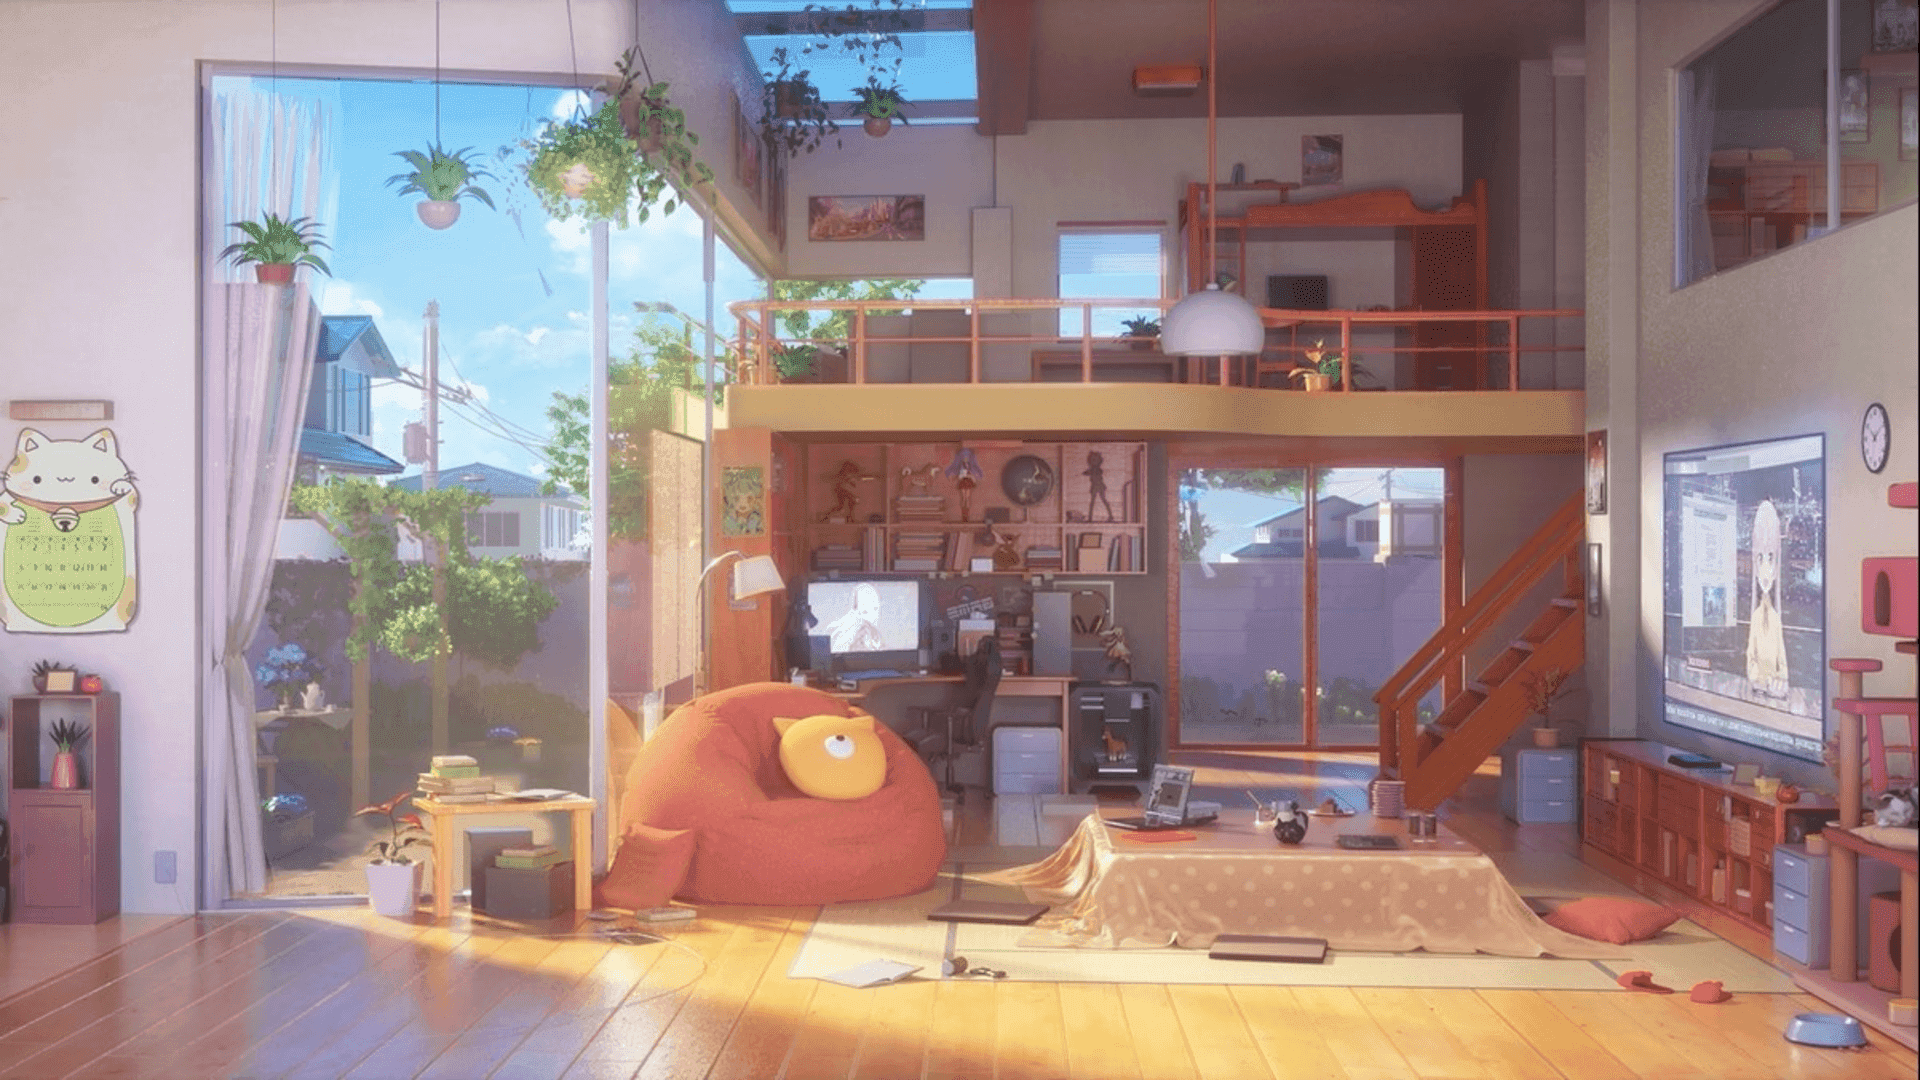 Unwind and Relax in this Cozy Anime Room